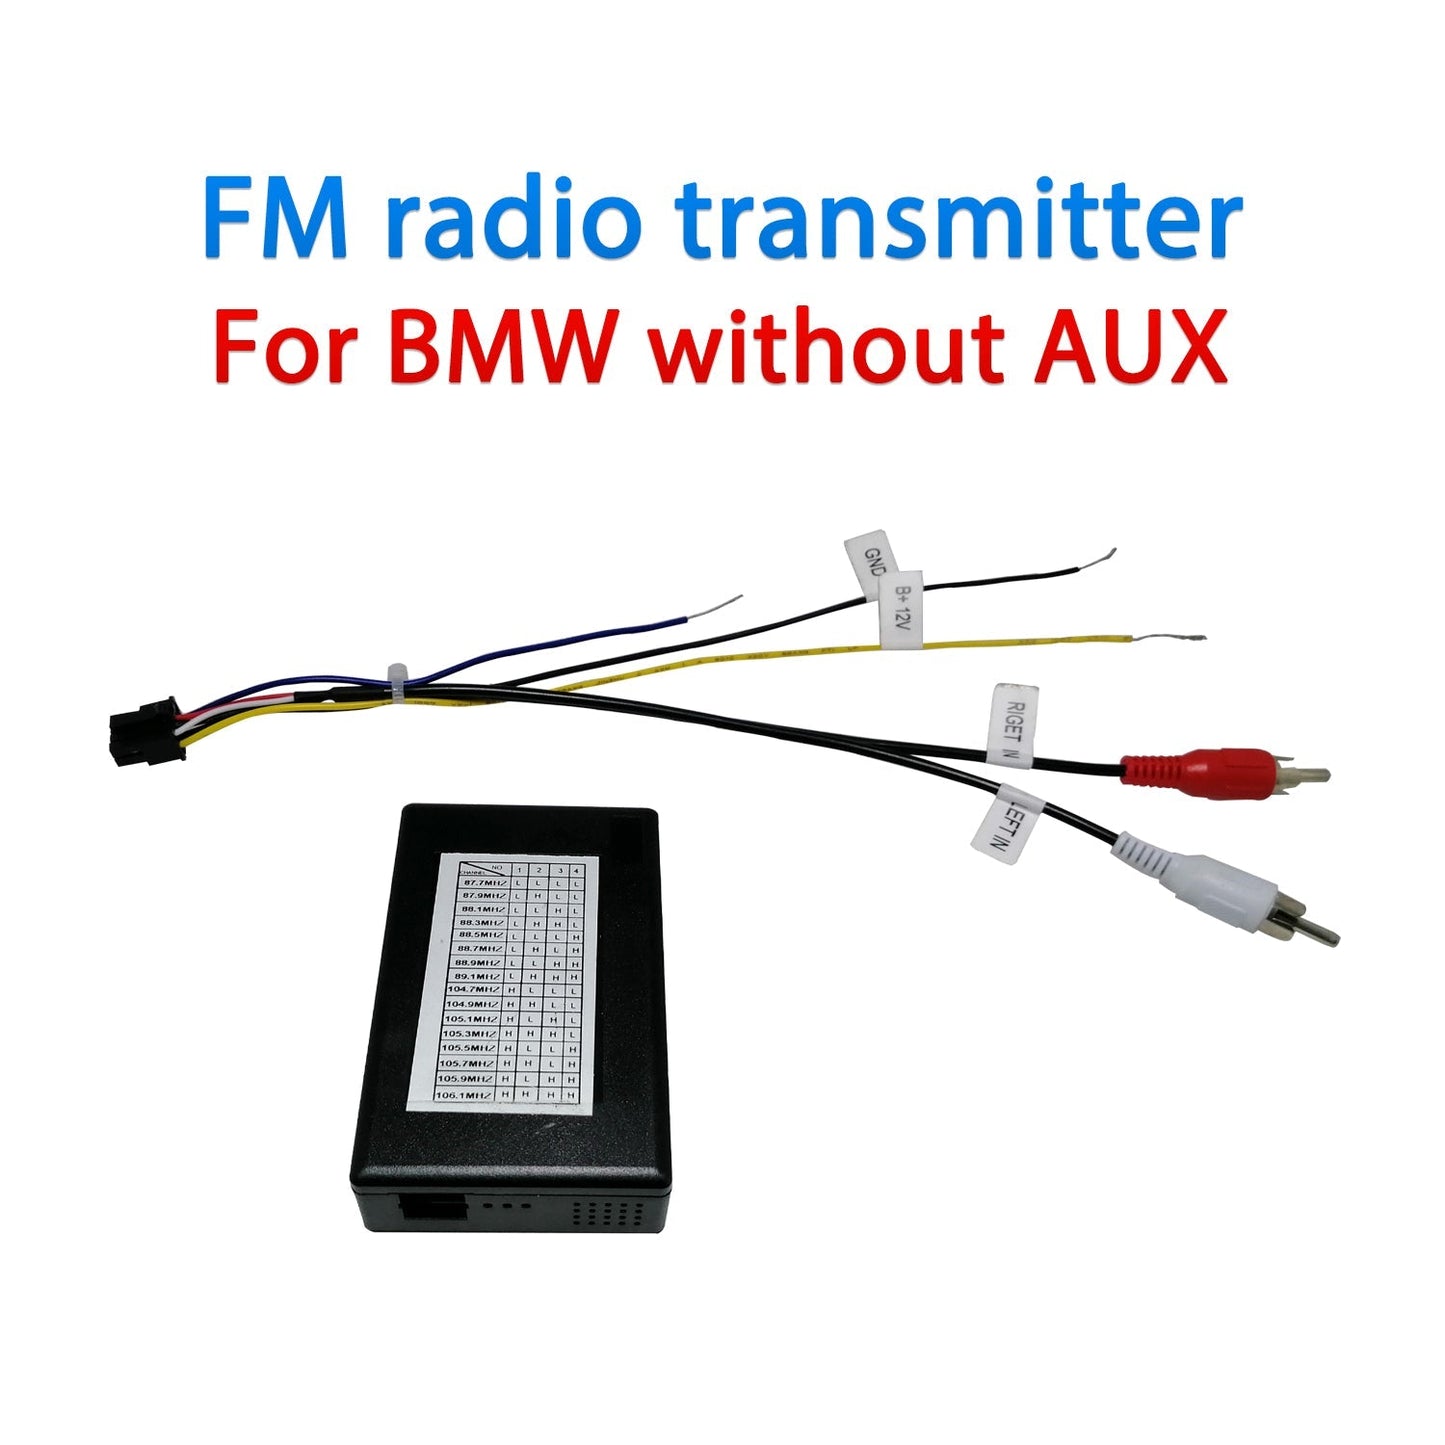 FM radio transmitter For BMW vehicles without AUX function